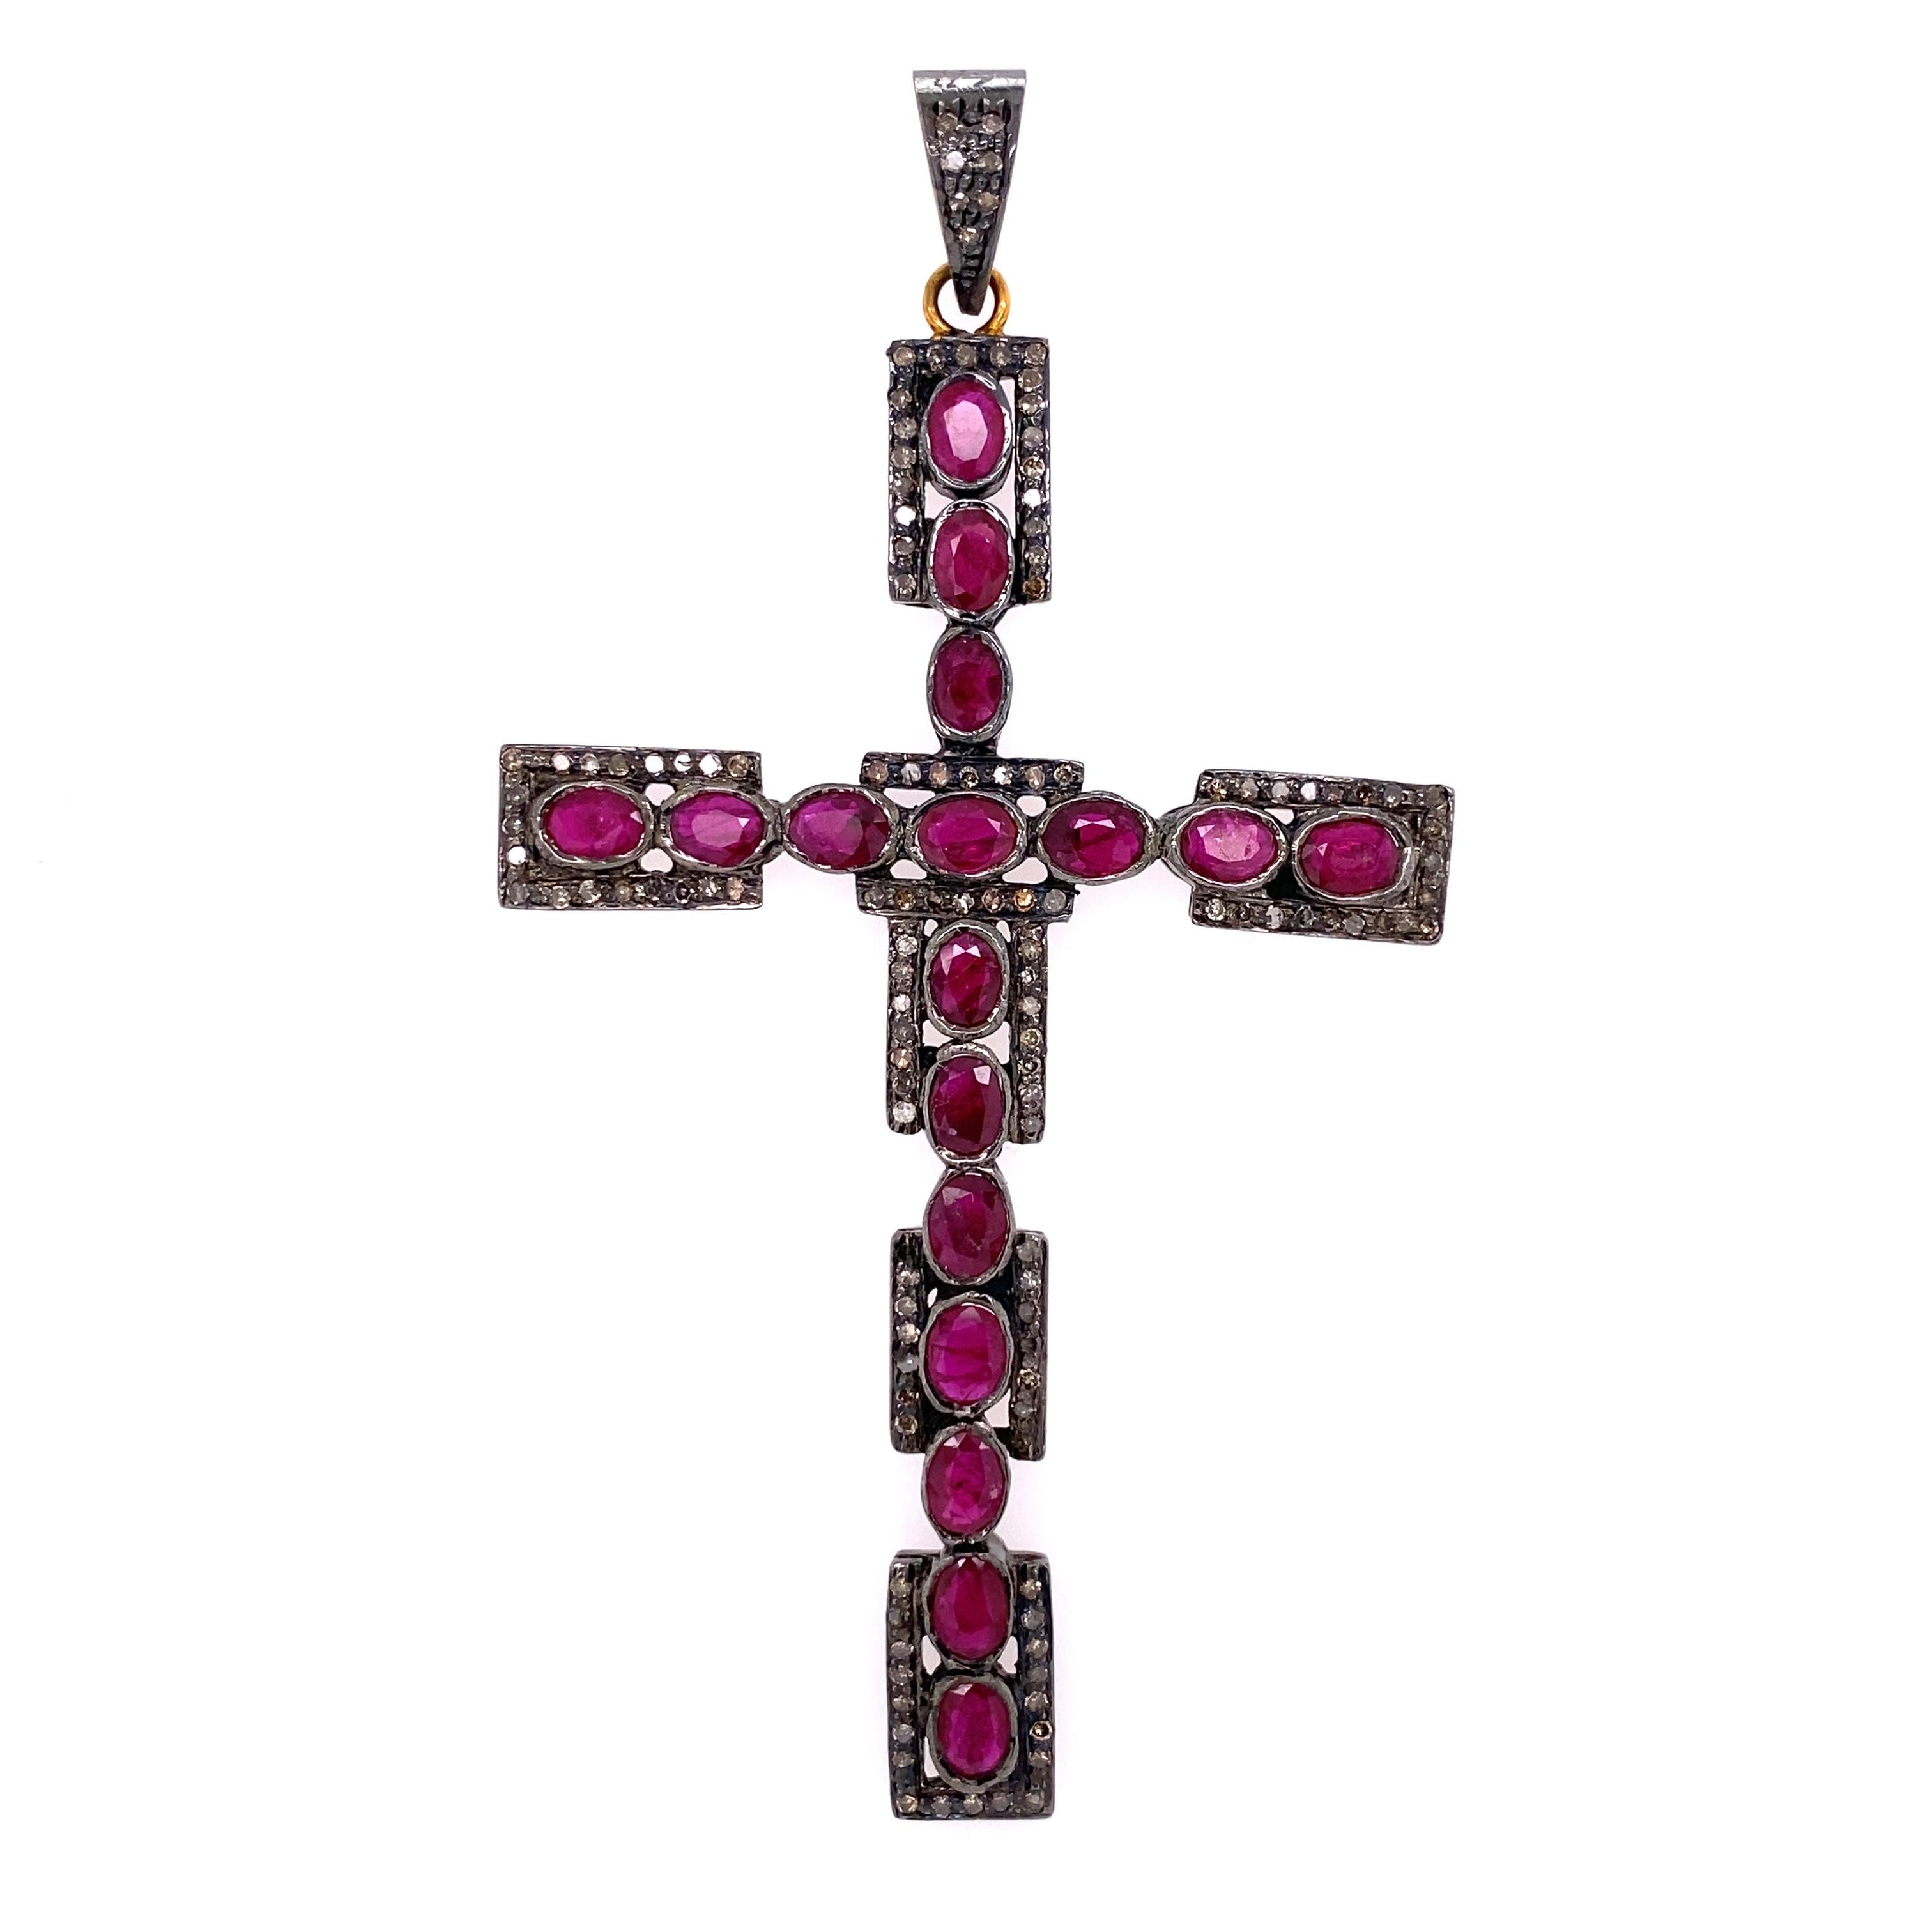 Simply Beautiful! Finely Detailed Ruby and Diamond Cross, Hand set with Rubies, approx. 4.30tcw and Diamonds, weighing approx. 1.02tcw. Hand crafted in 925 Sterling Silver and 14K Yellow Gold. The Cross measures approx. 3.50” tall. A must have